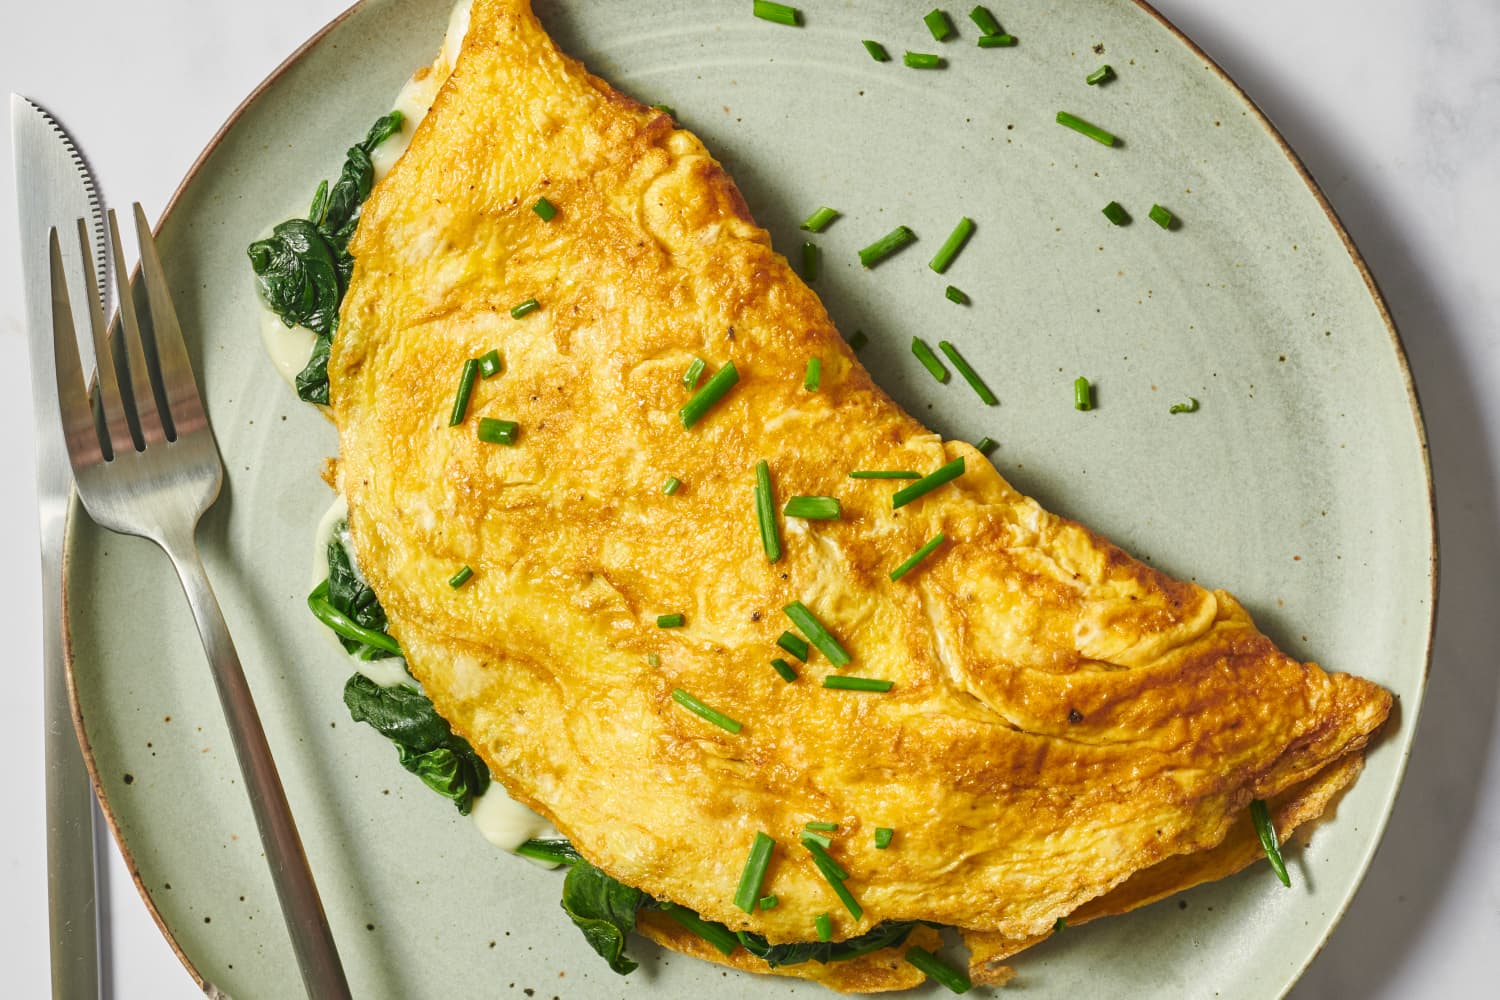 How to Make an Omelet: A Step-by-Step Recipe with Photos | The Kitchn